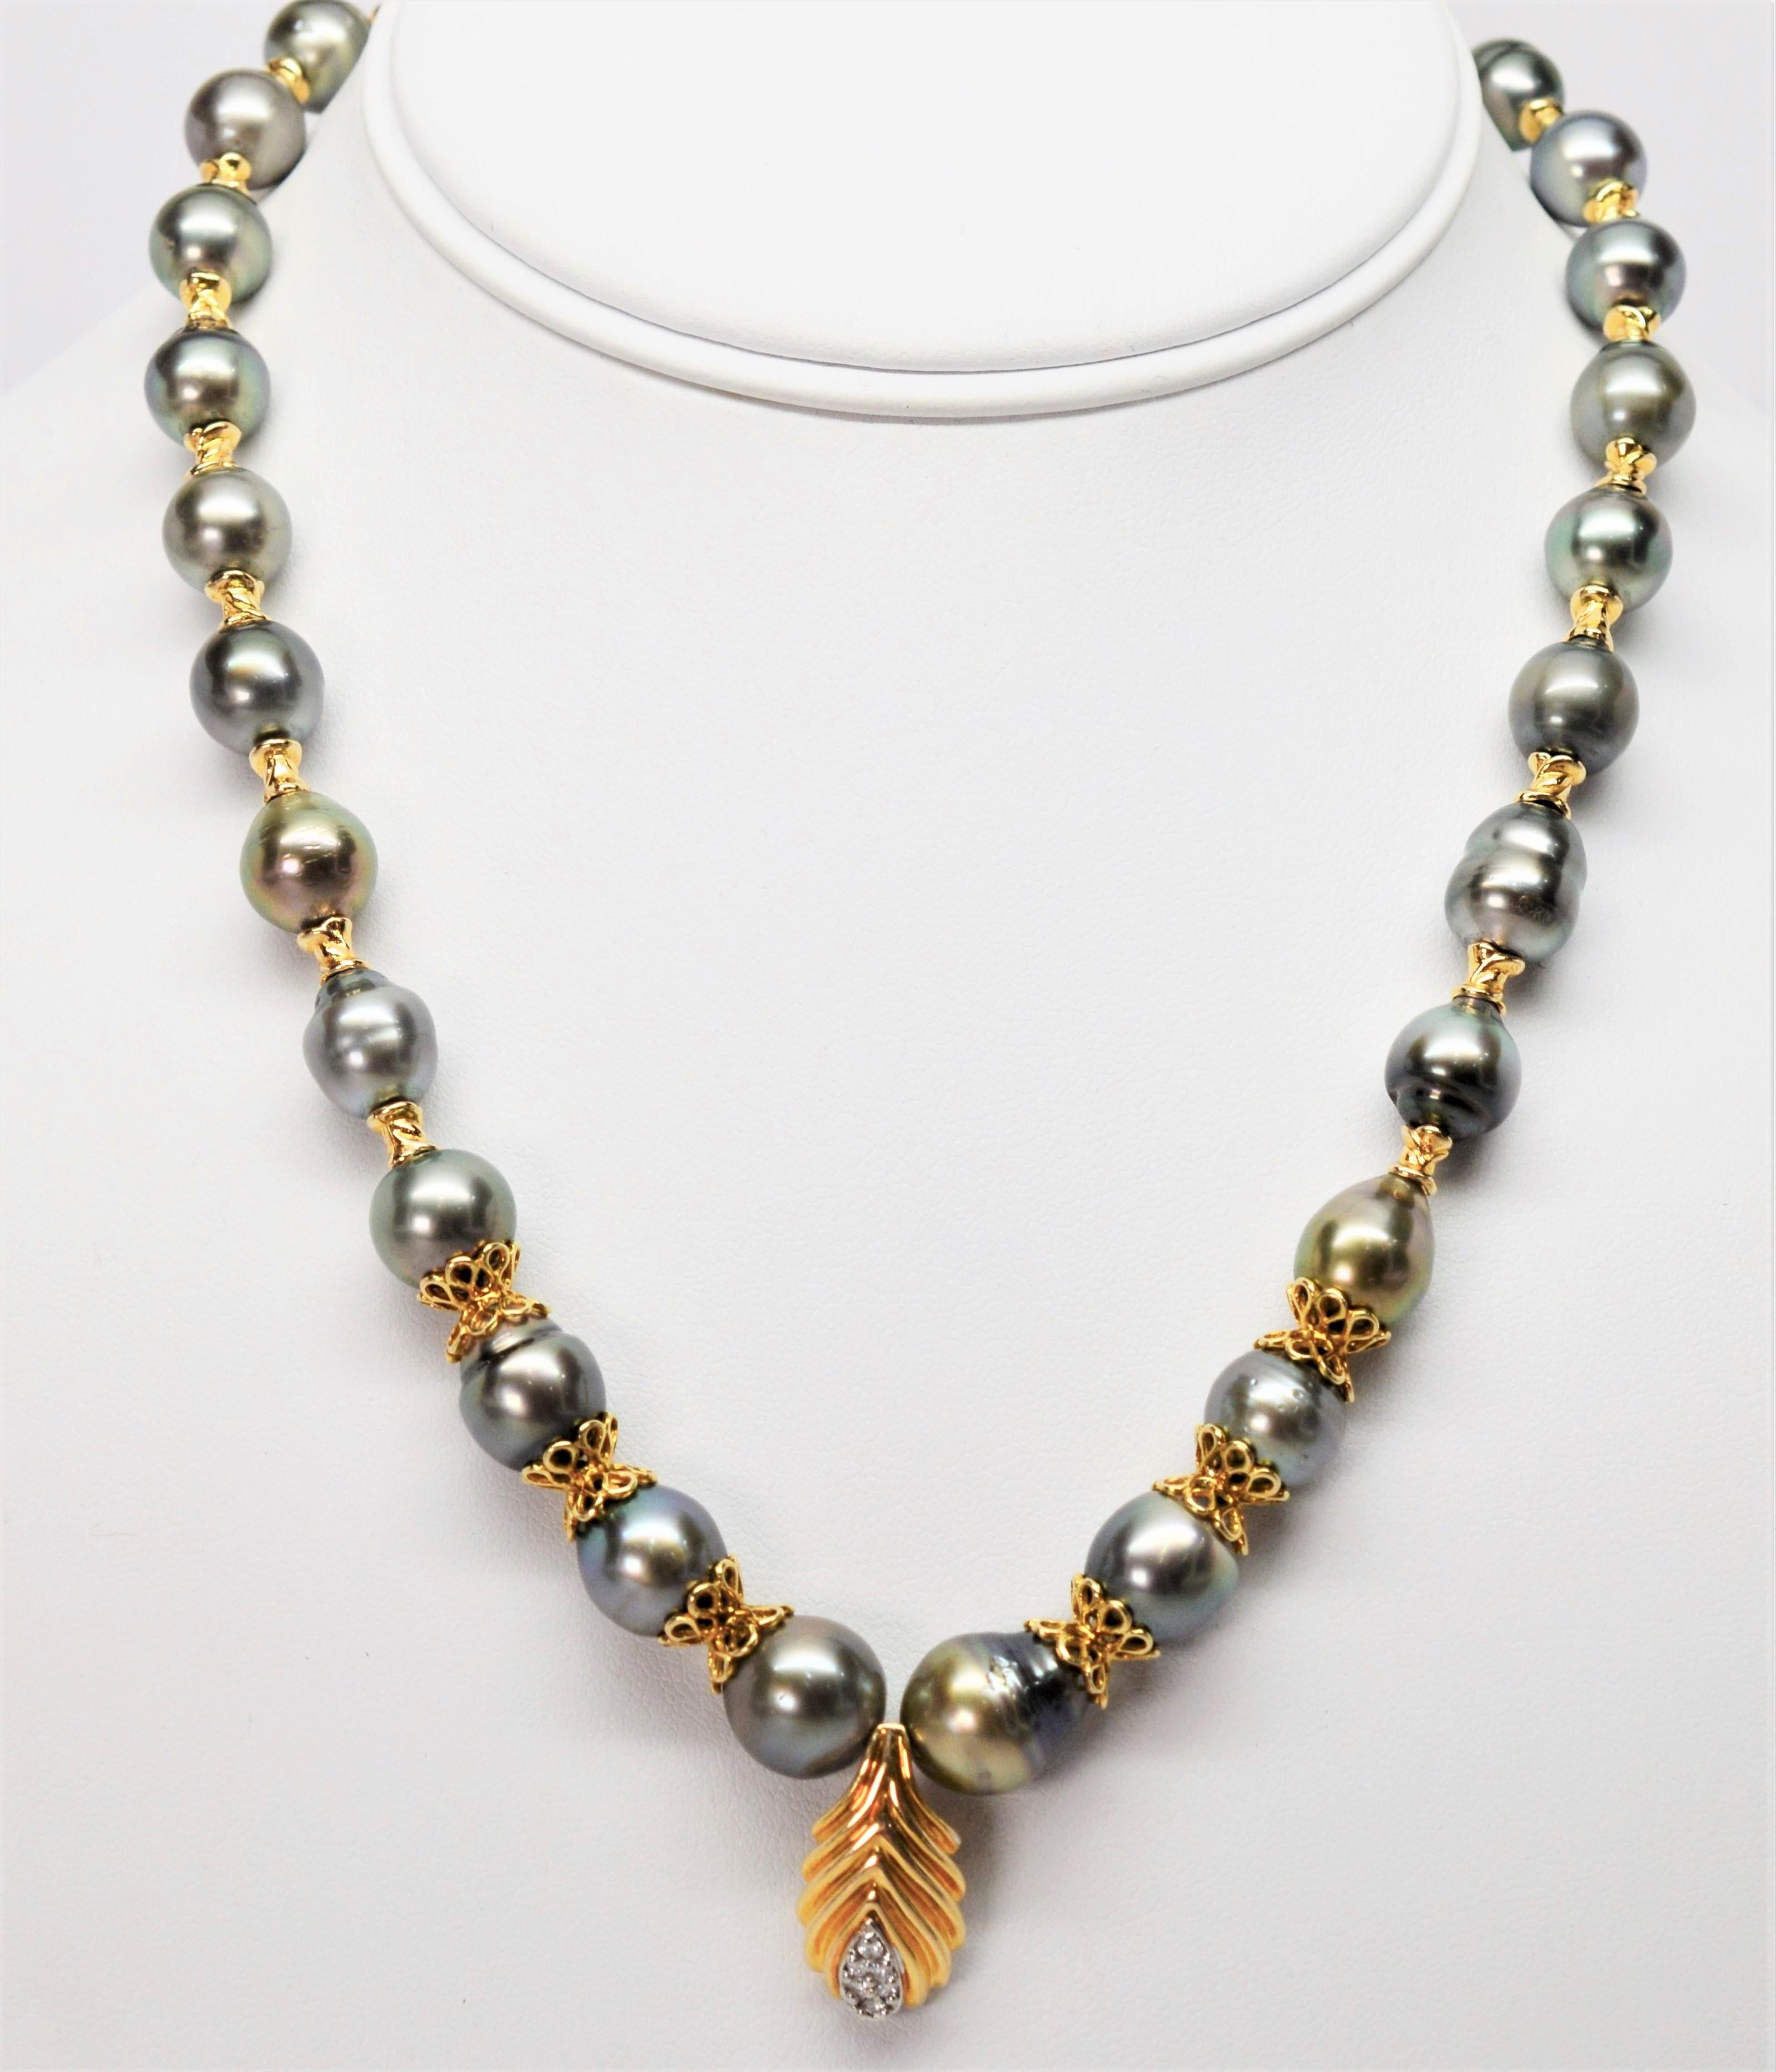 Lustrous silvery gray baroque and ringed Akoya Pearls graduating from 8 mm to 11 mm create this sophisticated strand. Uniquely hand strung with fancy fourteen carat yellow gold filigree accents leading to a polished yellow gold pendant with diamond